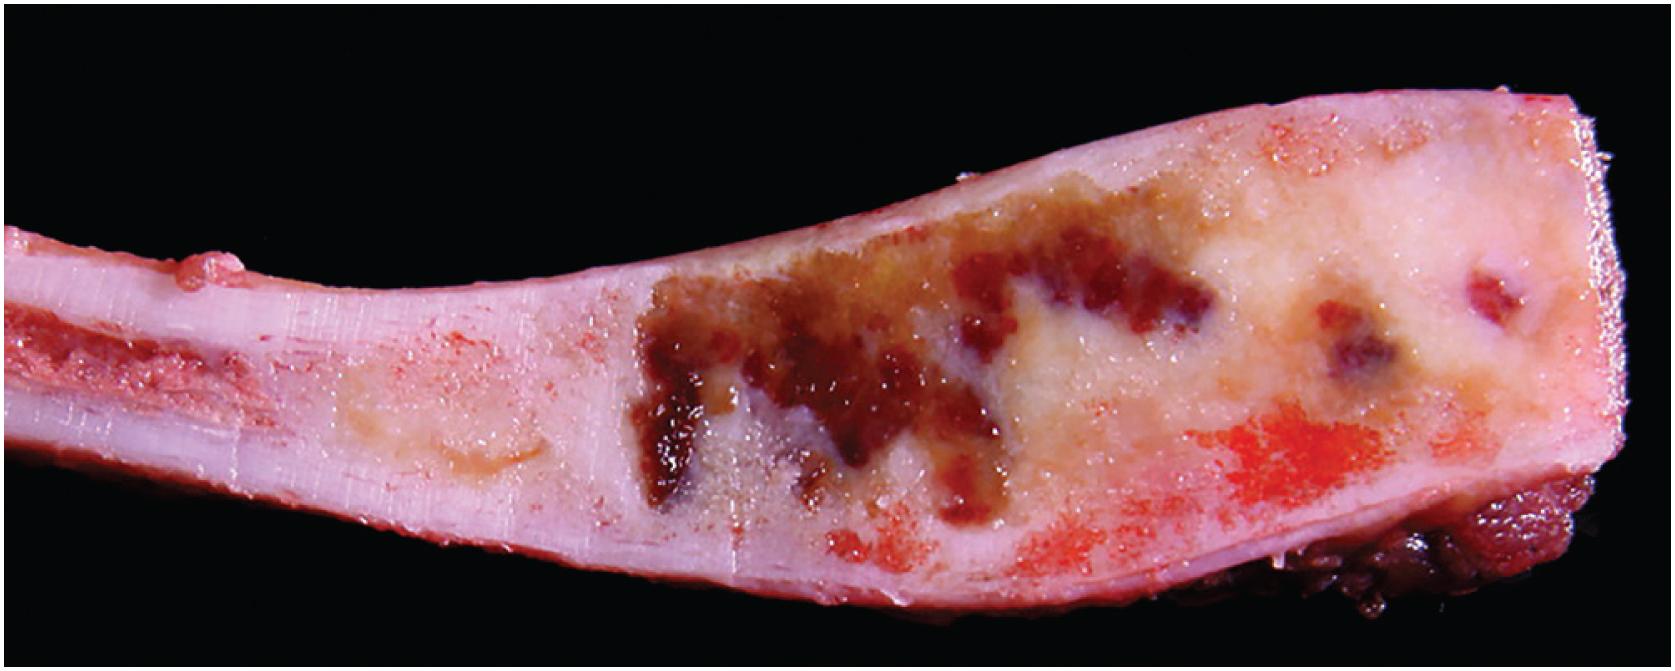 Fig. 24.2, Fibrous dysplasia of the rib. The tumor is solid and tan with cystic areas. It is well demarcated but has “expanded” the bone.